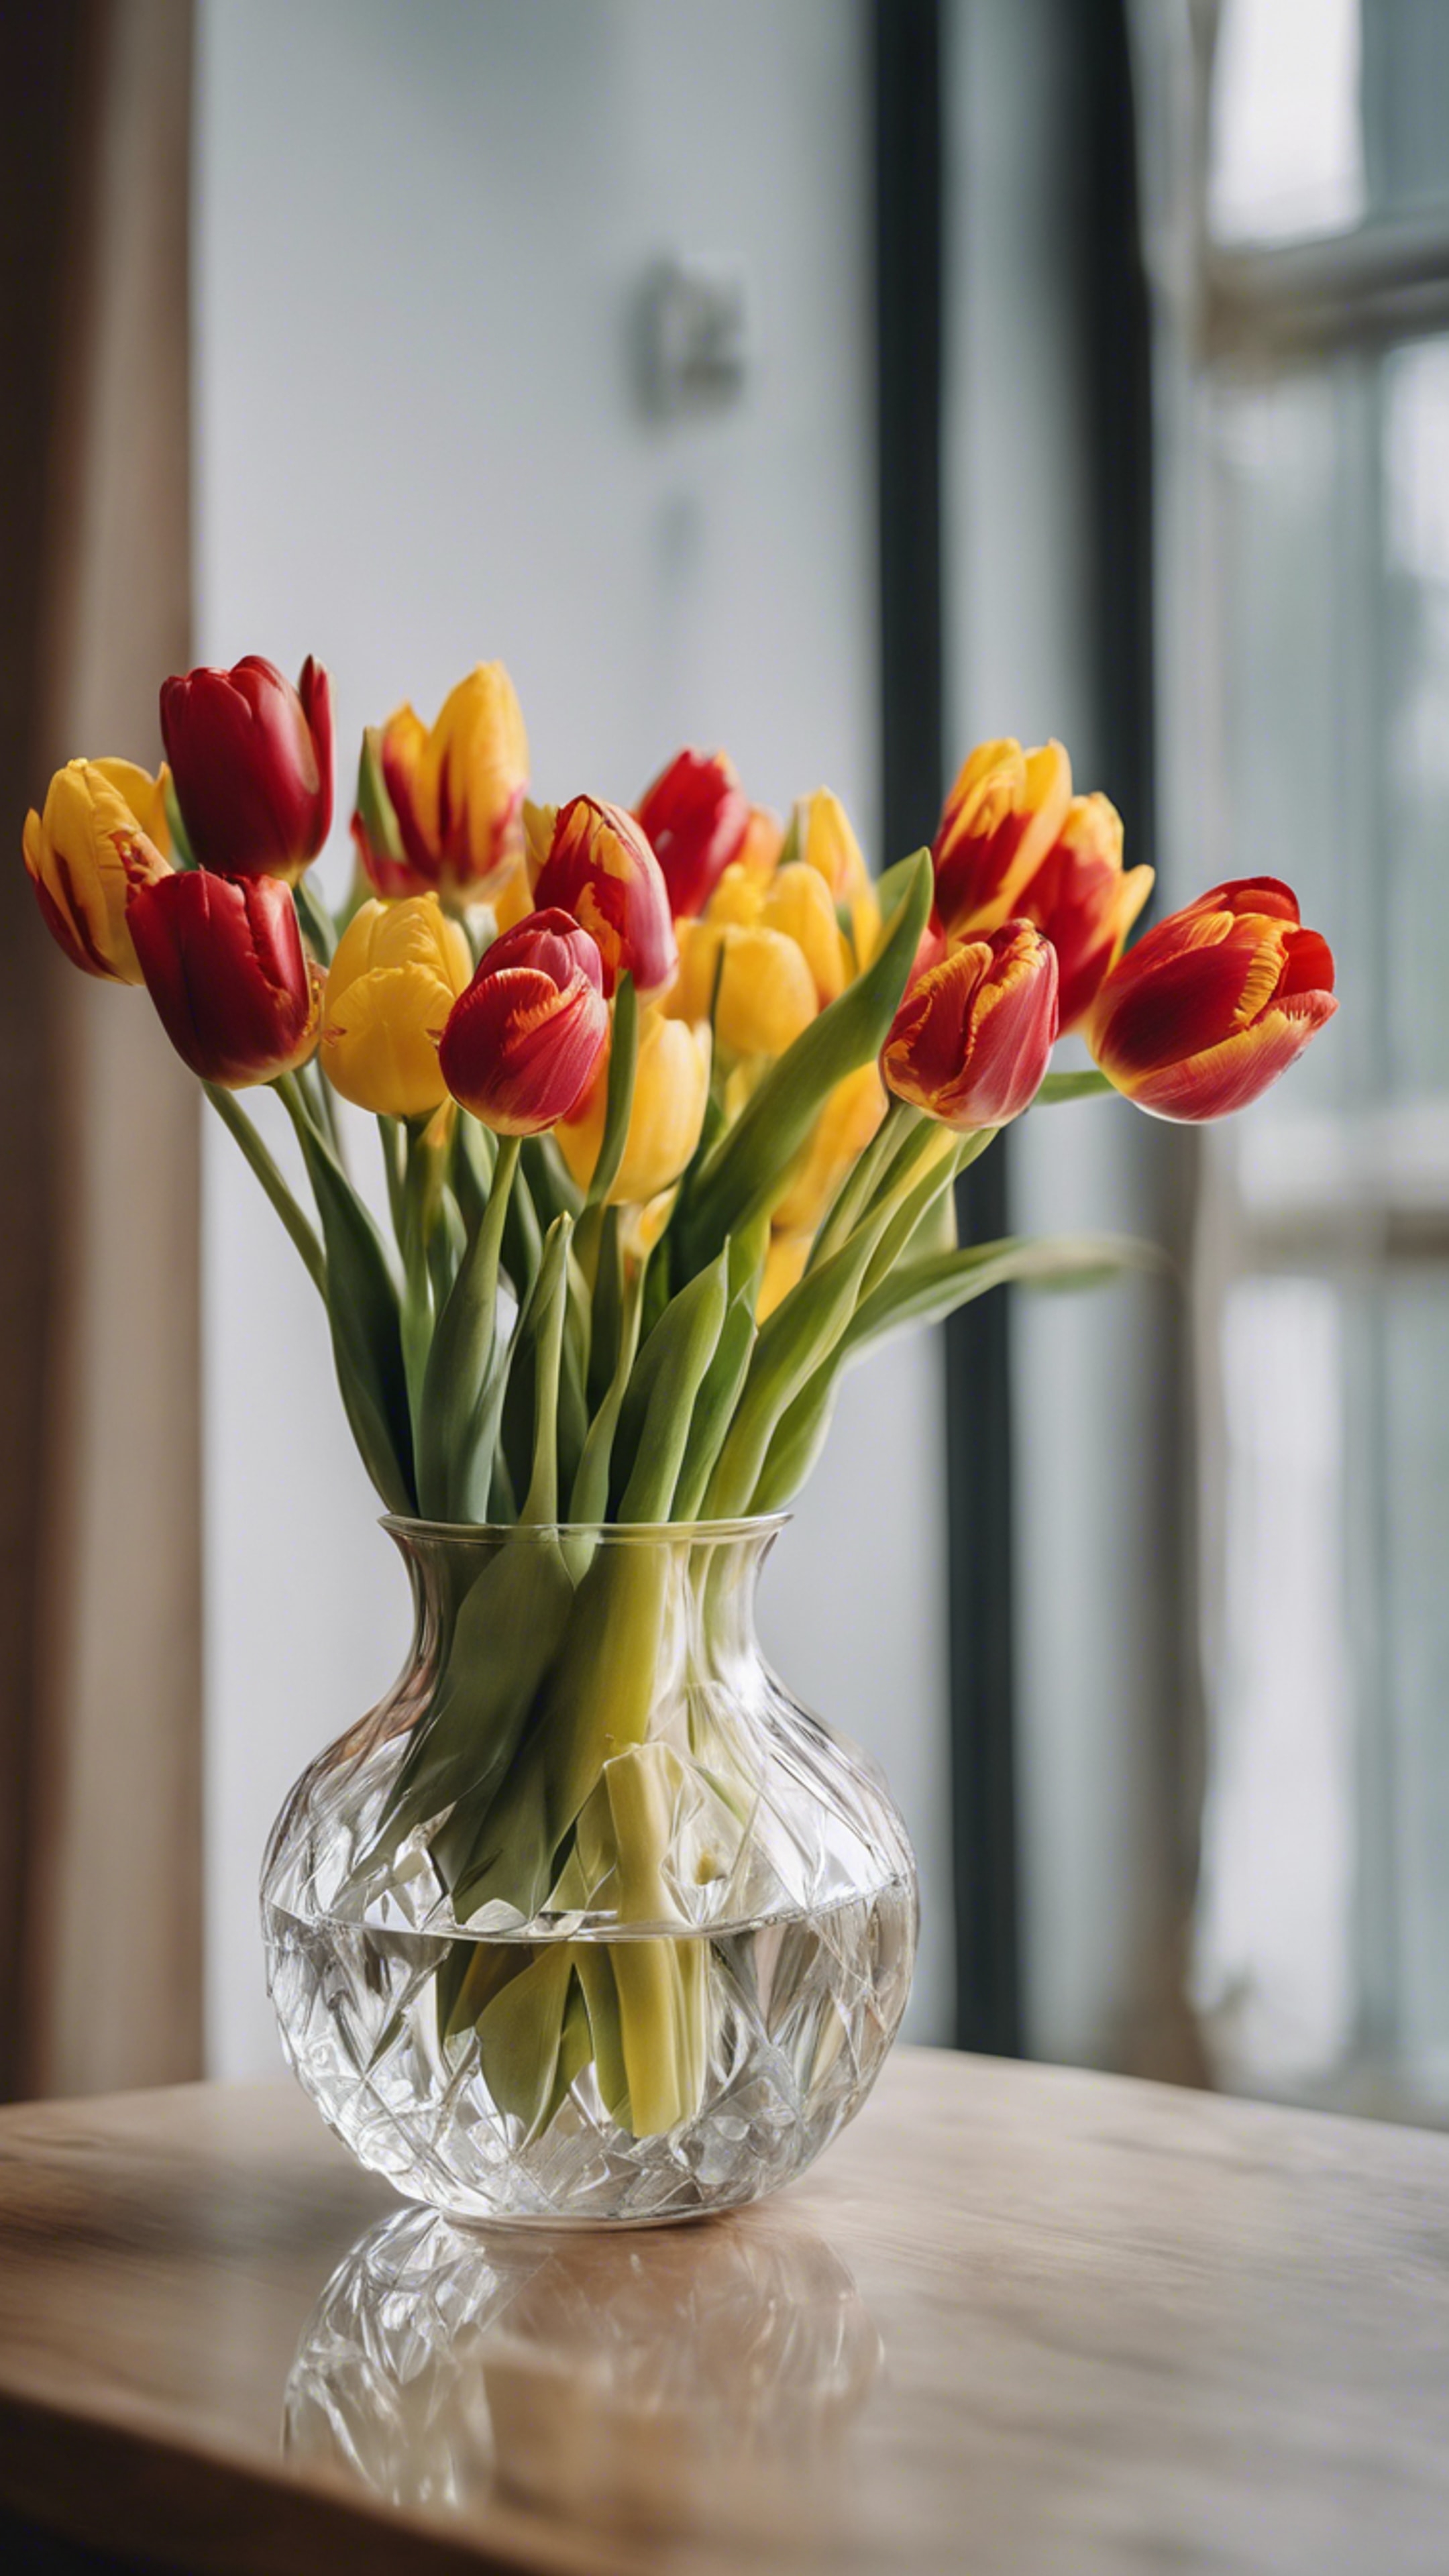 A bunch of fresh red and yellow tulips resting in a crystal clear vase. ورق الجدران[770eab0b3cc545c1af9b]